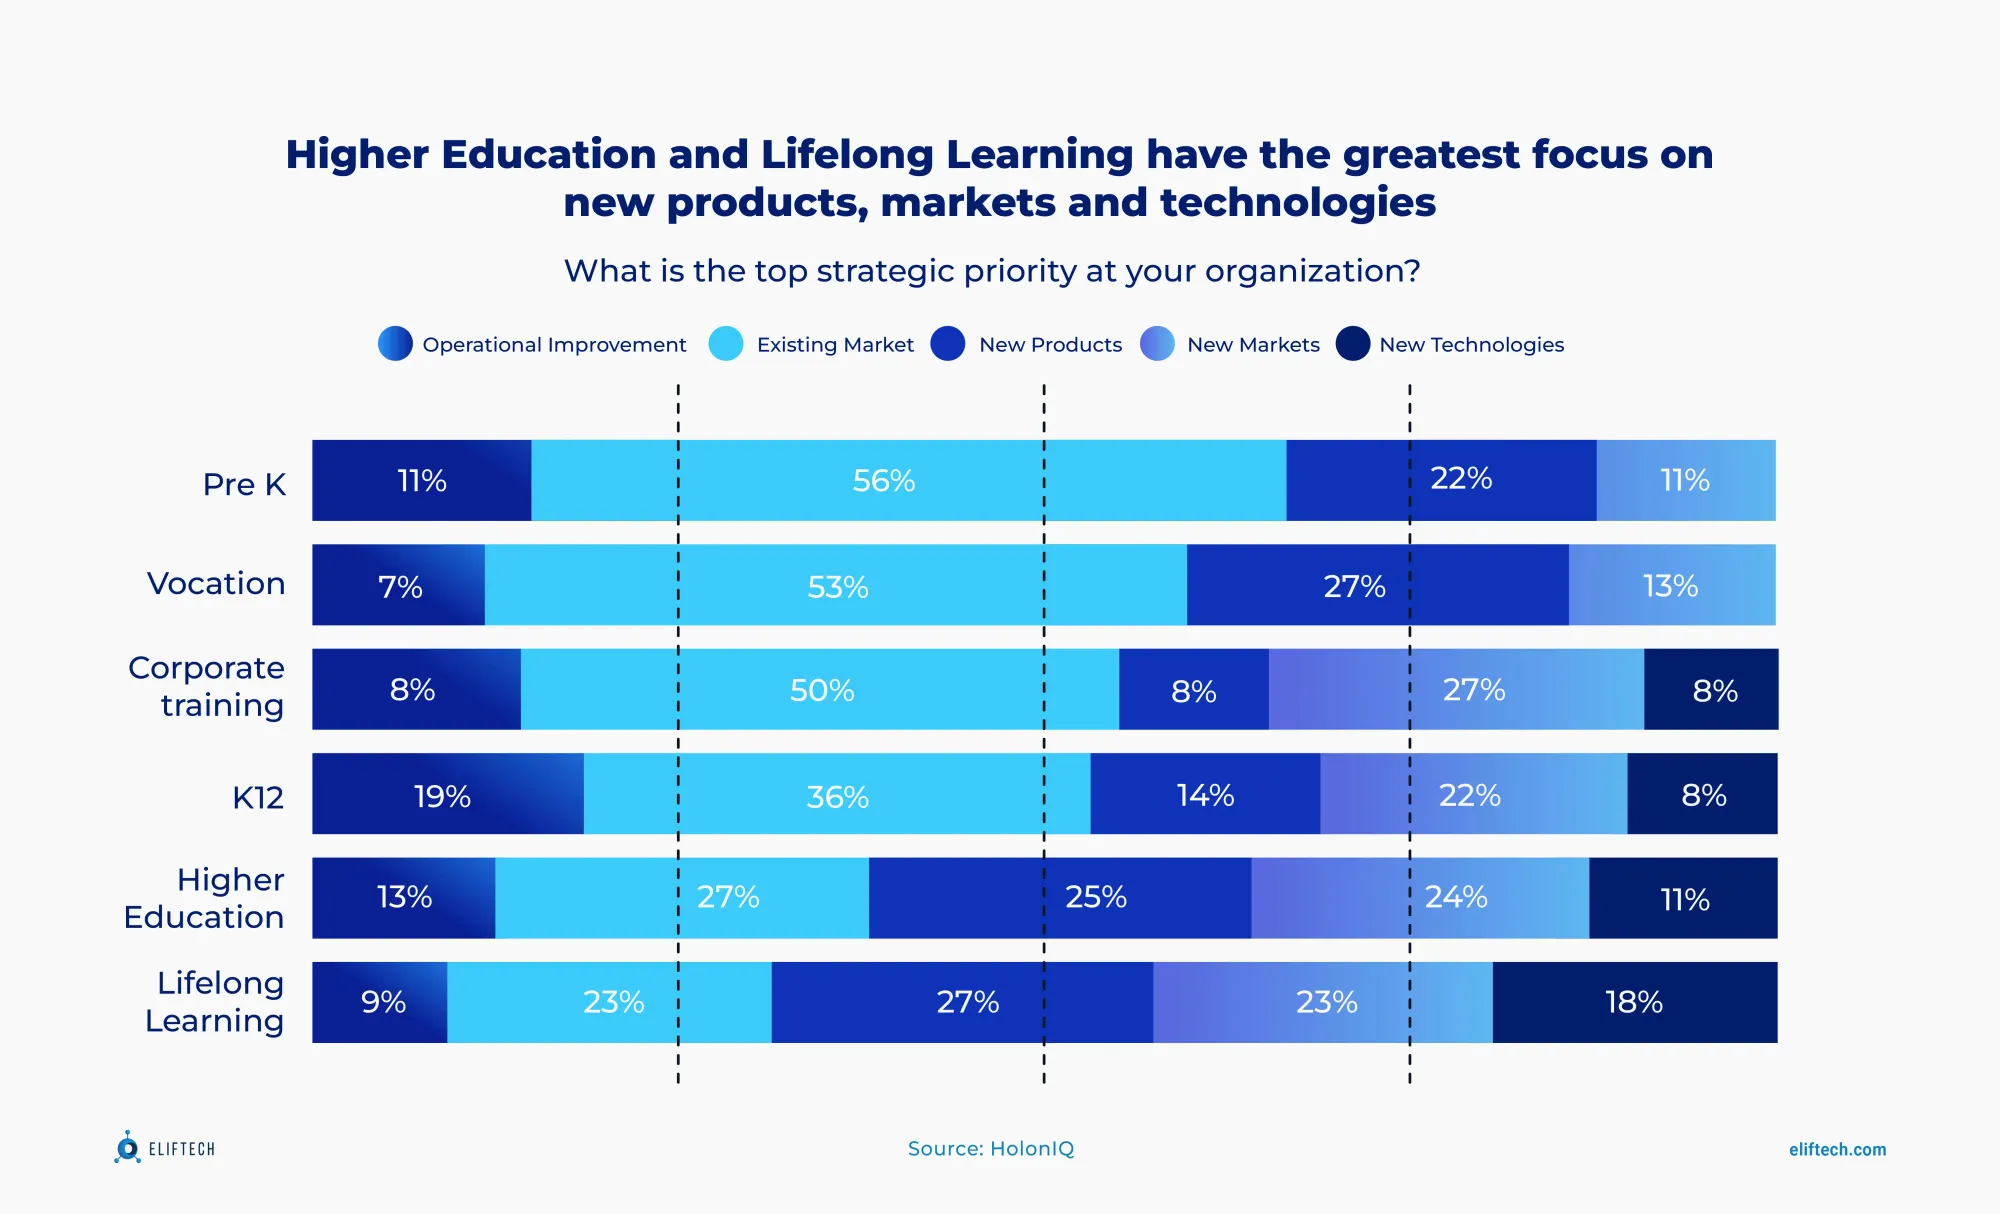 Edtech emphasizes innovative products, market expansion, and advanced technologies